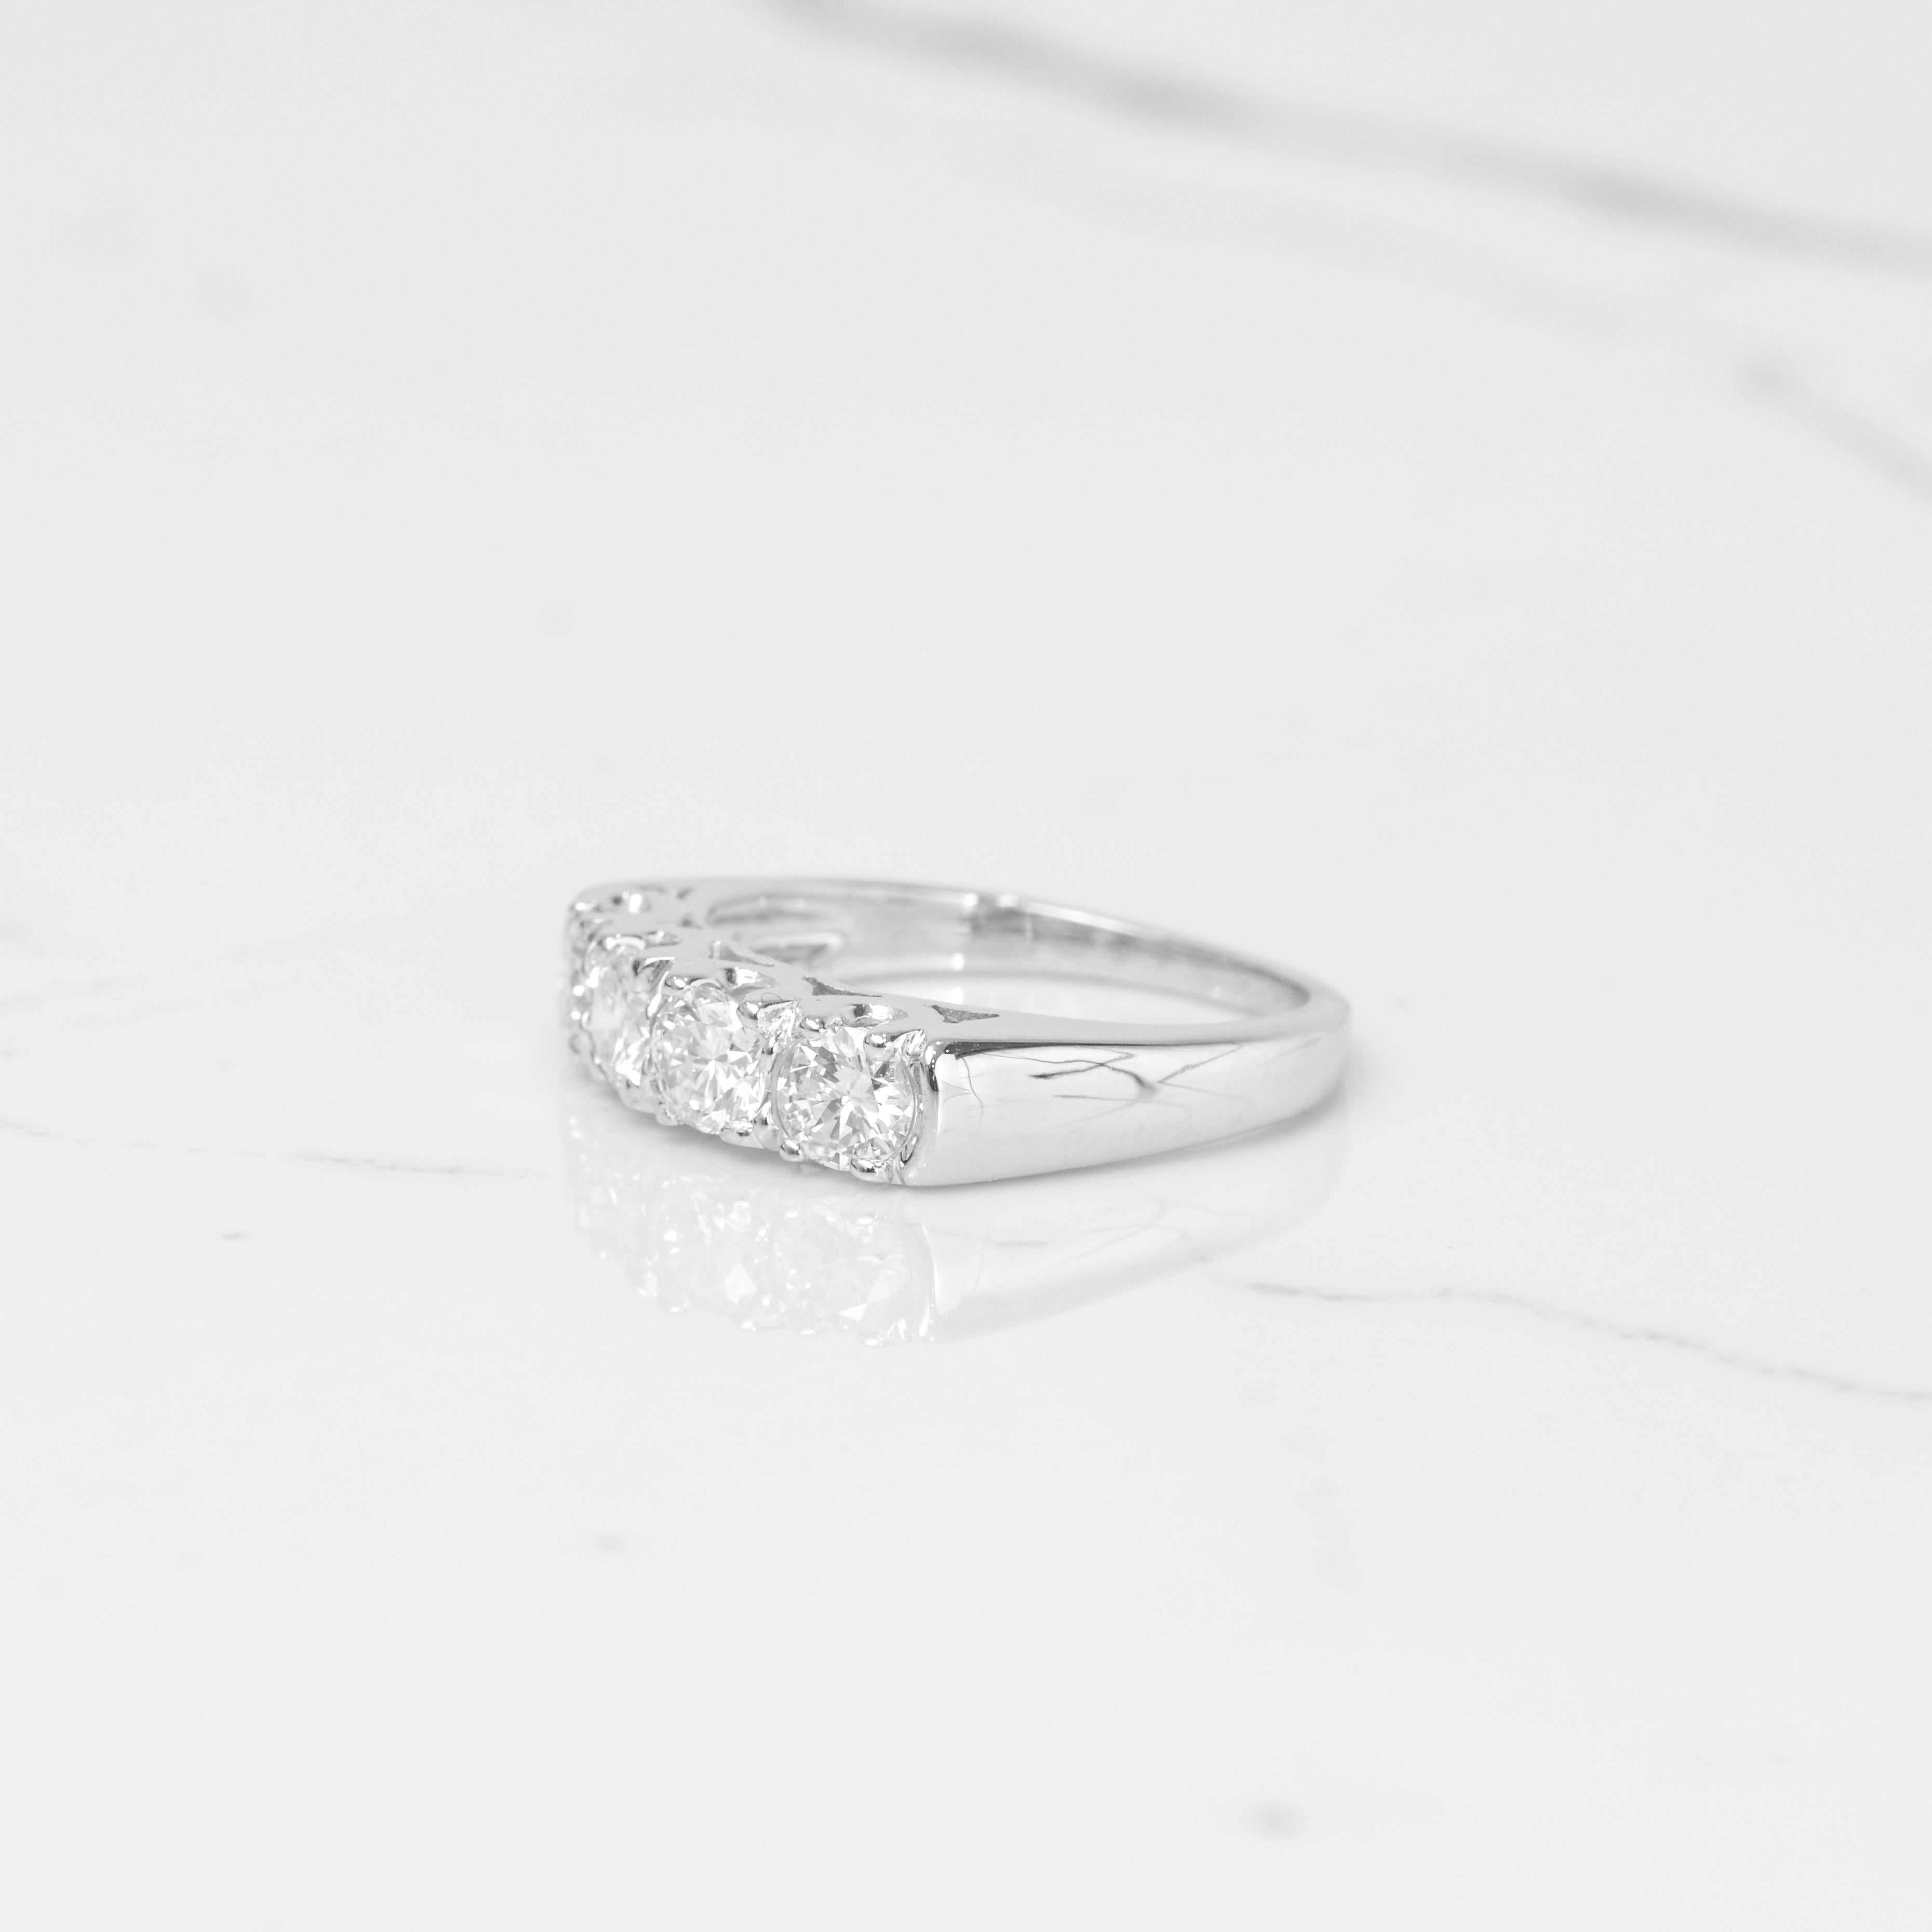 This gorgeous diamond anniversary band is part of our reclaimed vintage collection. Restored like new, this band consists of 1 carat of beautiful high quality diamonds! Beautifully set in 14k white gold. Ring size is a 6.
Additional sizes available